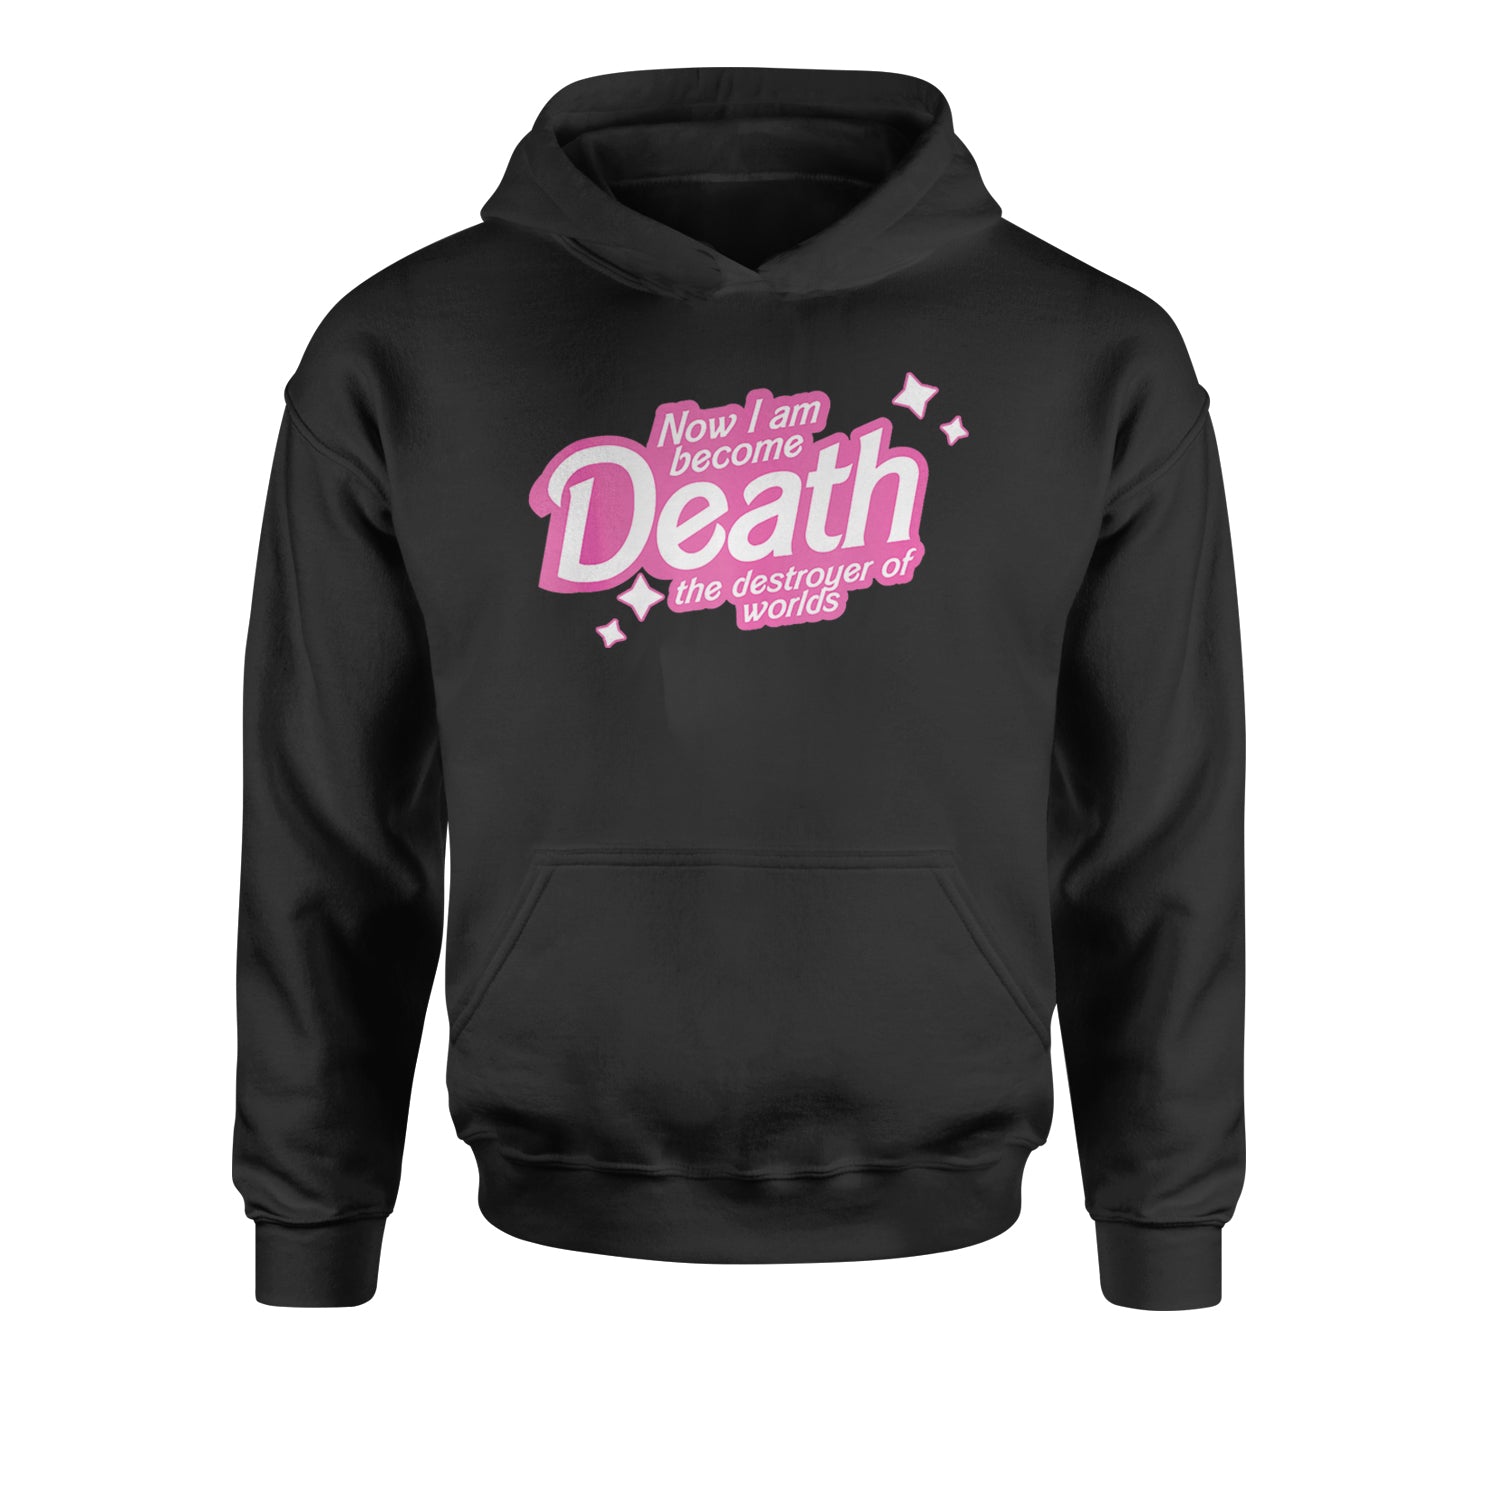 Now I am Become Death Barbenheimer Youth-Sized Hoodie